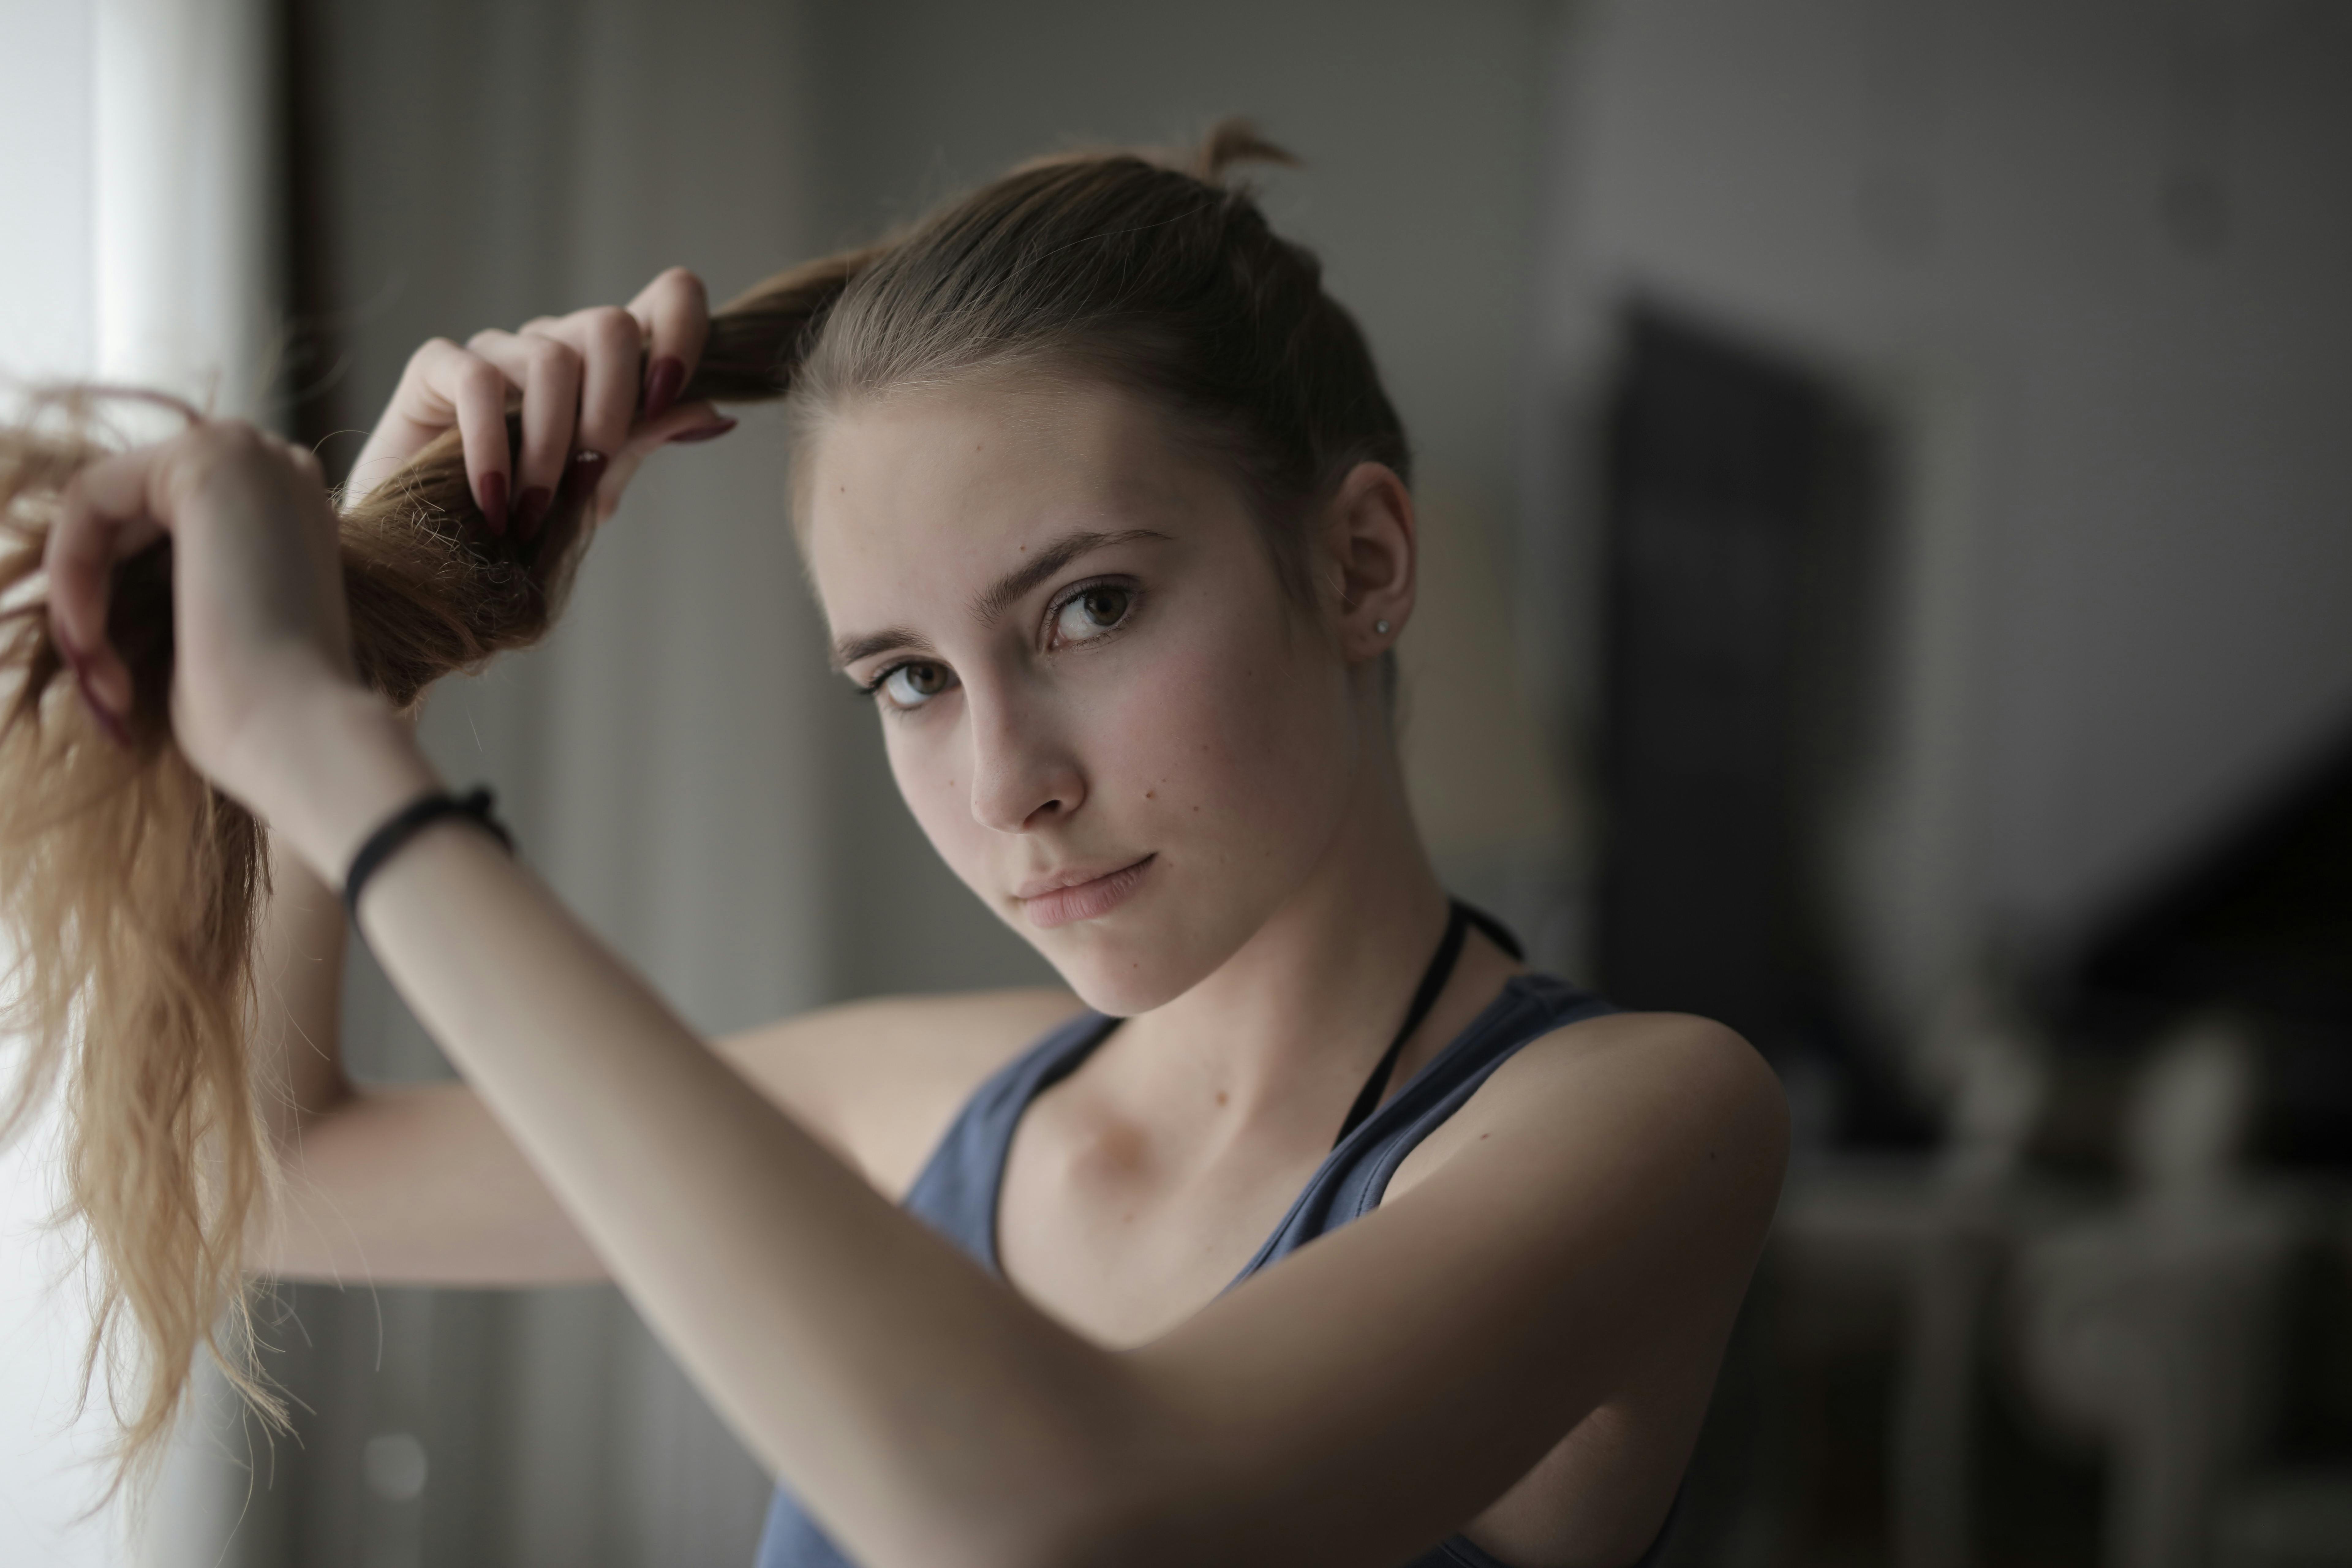 Woman in Blue Tank Top While Holding Her Hair · Free Stock Photo